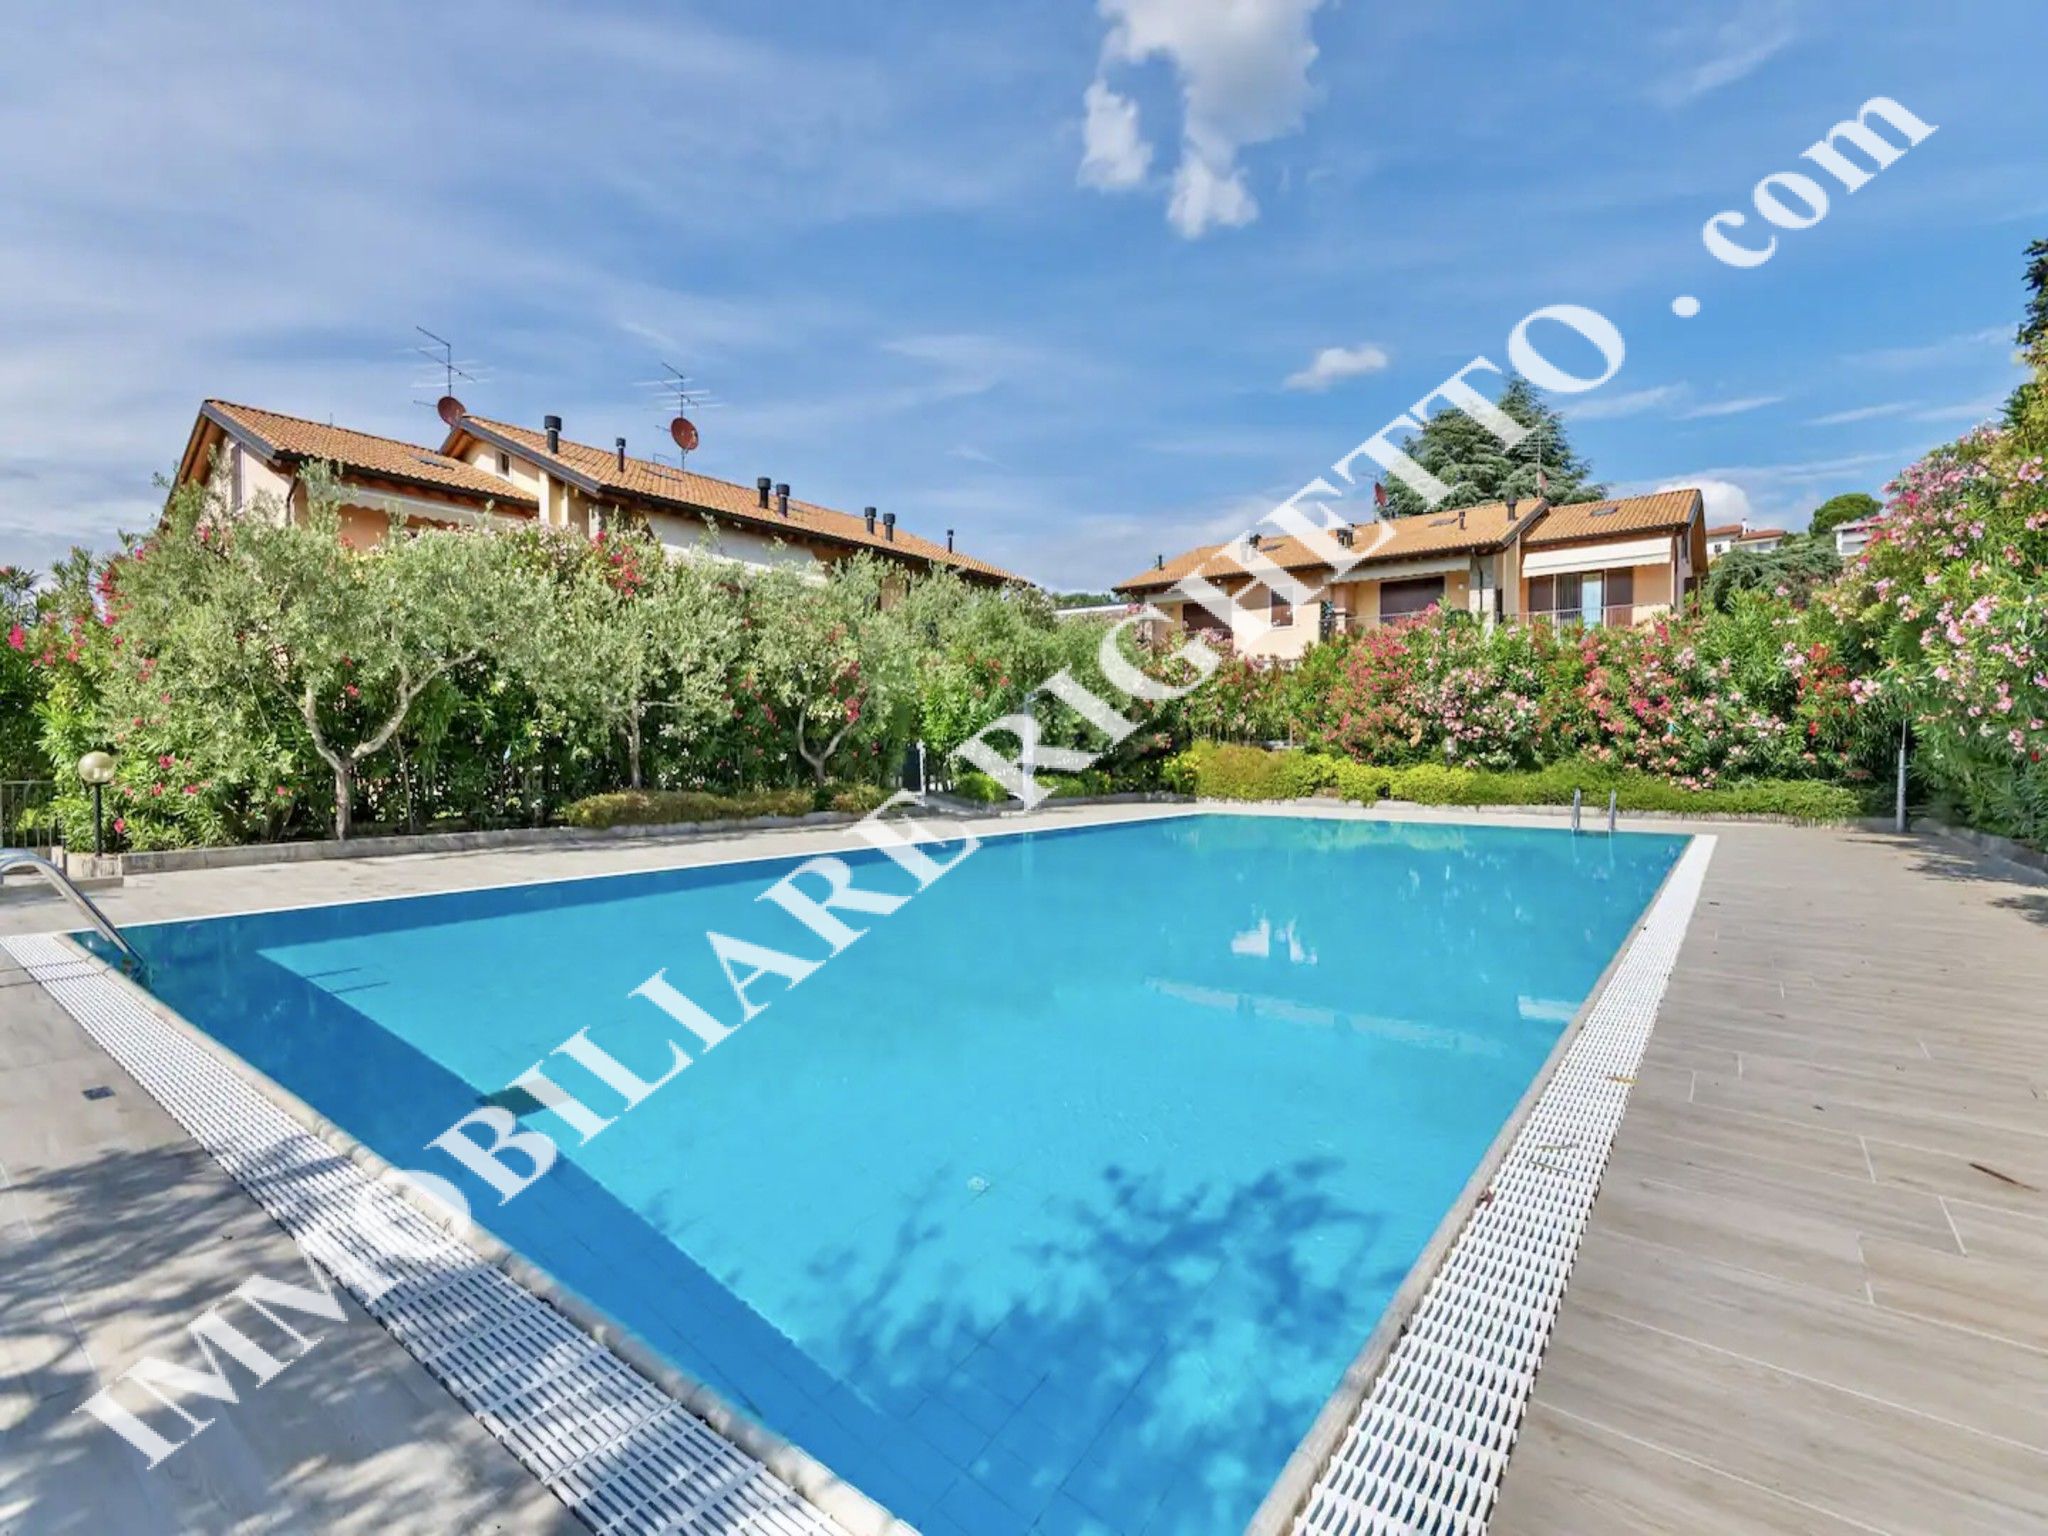 offer property for sale Spacious flat in elegant complex with swimming-pool.